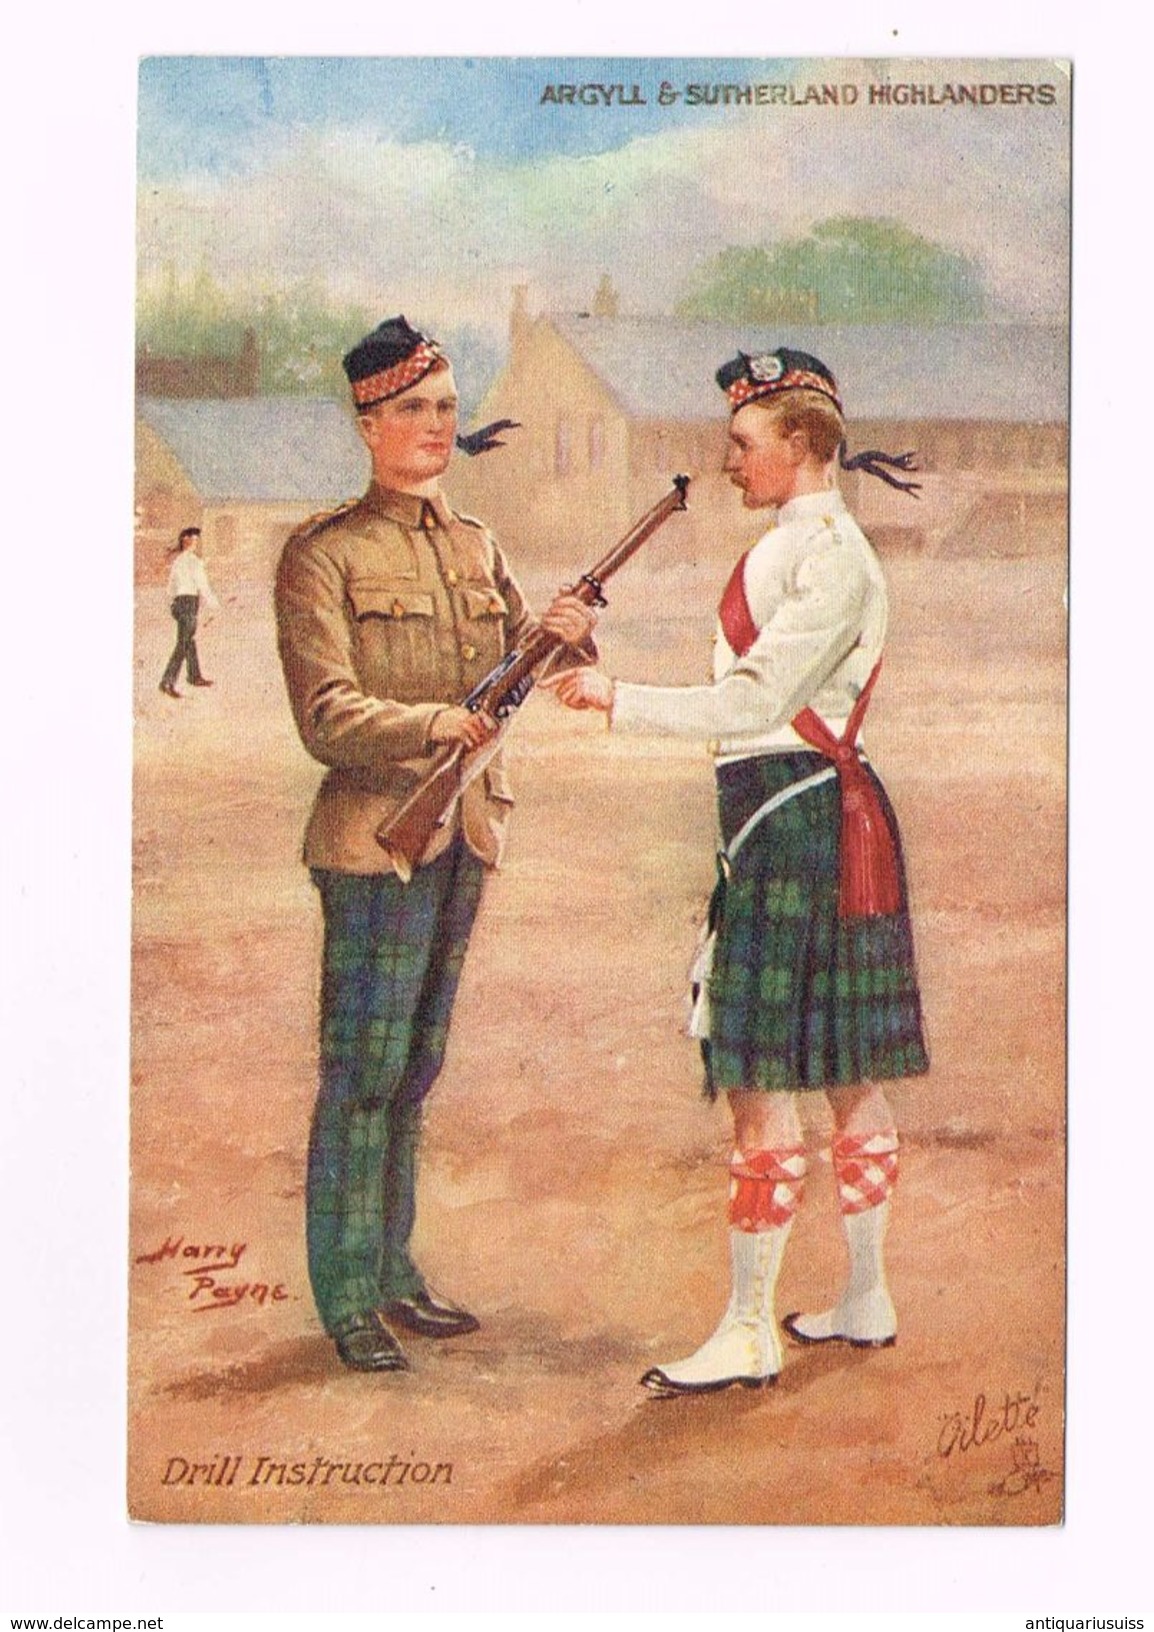 THE ARGYLL AND SUTHERLAND HIGHLANDERS - United Kingdom - Scottish Soldiers- Drill Instruction - Costumi